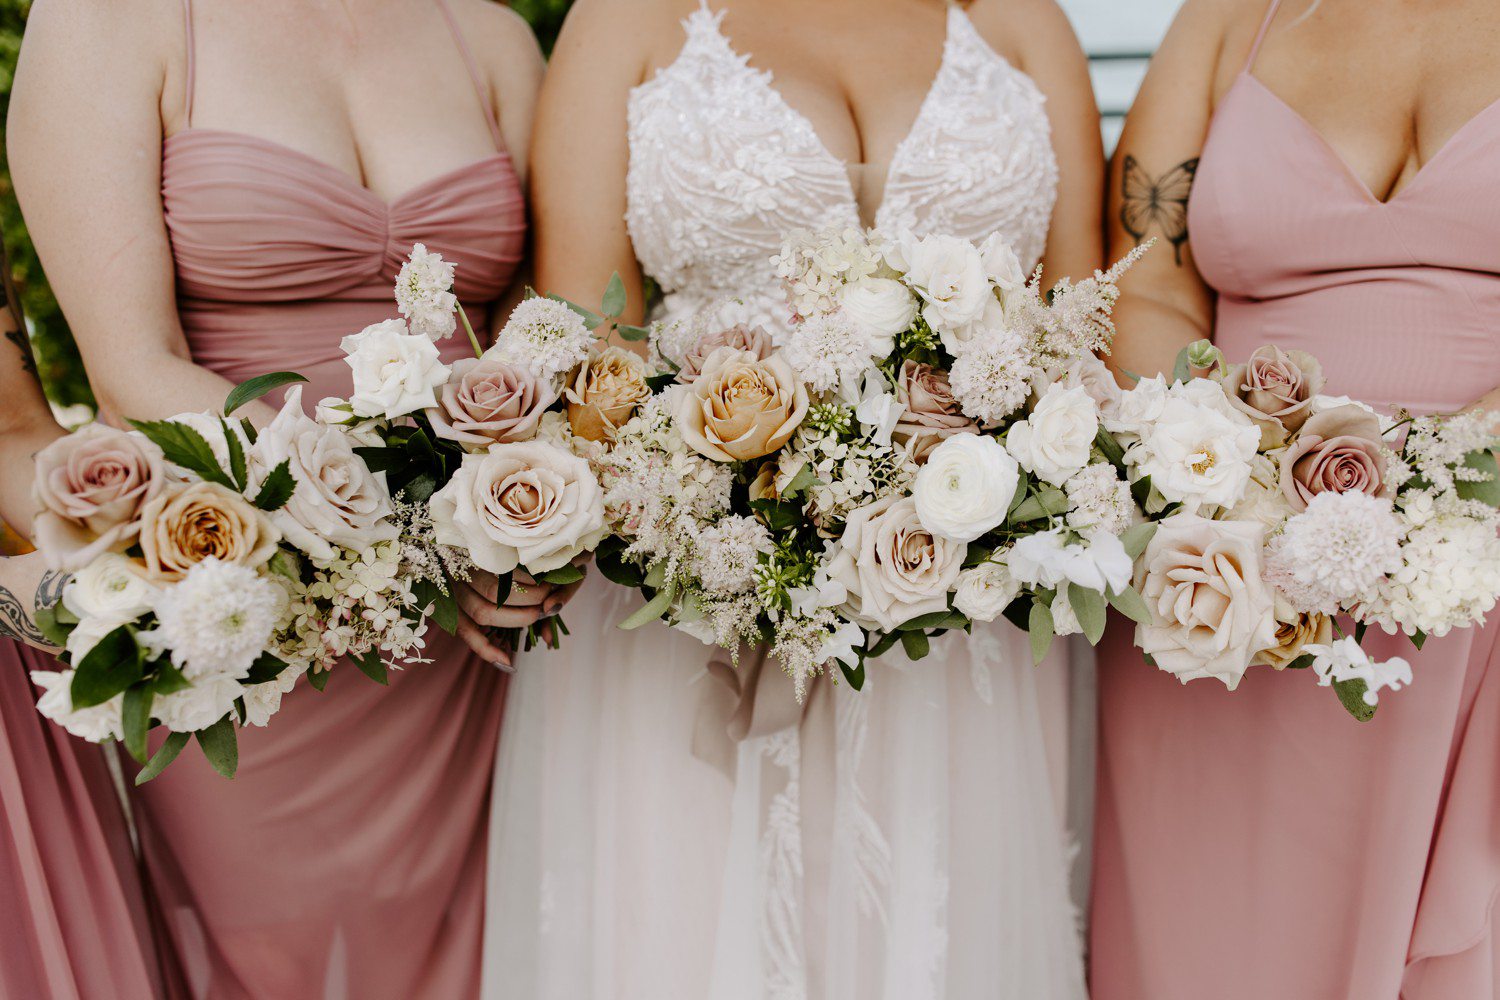 Bride and bridesmaid bouquets with white and light pink flowers.